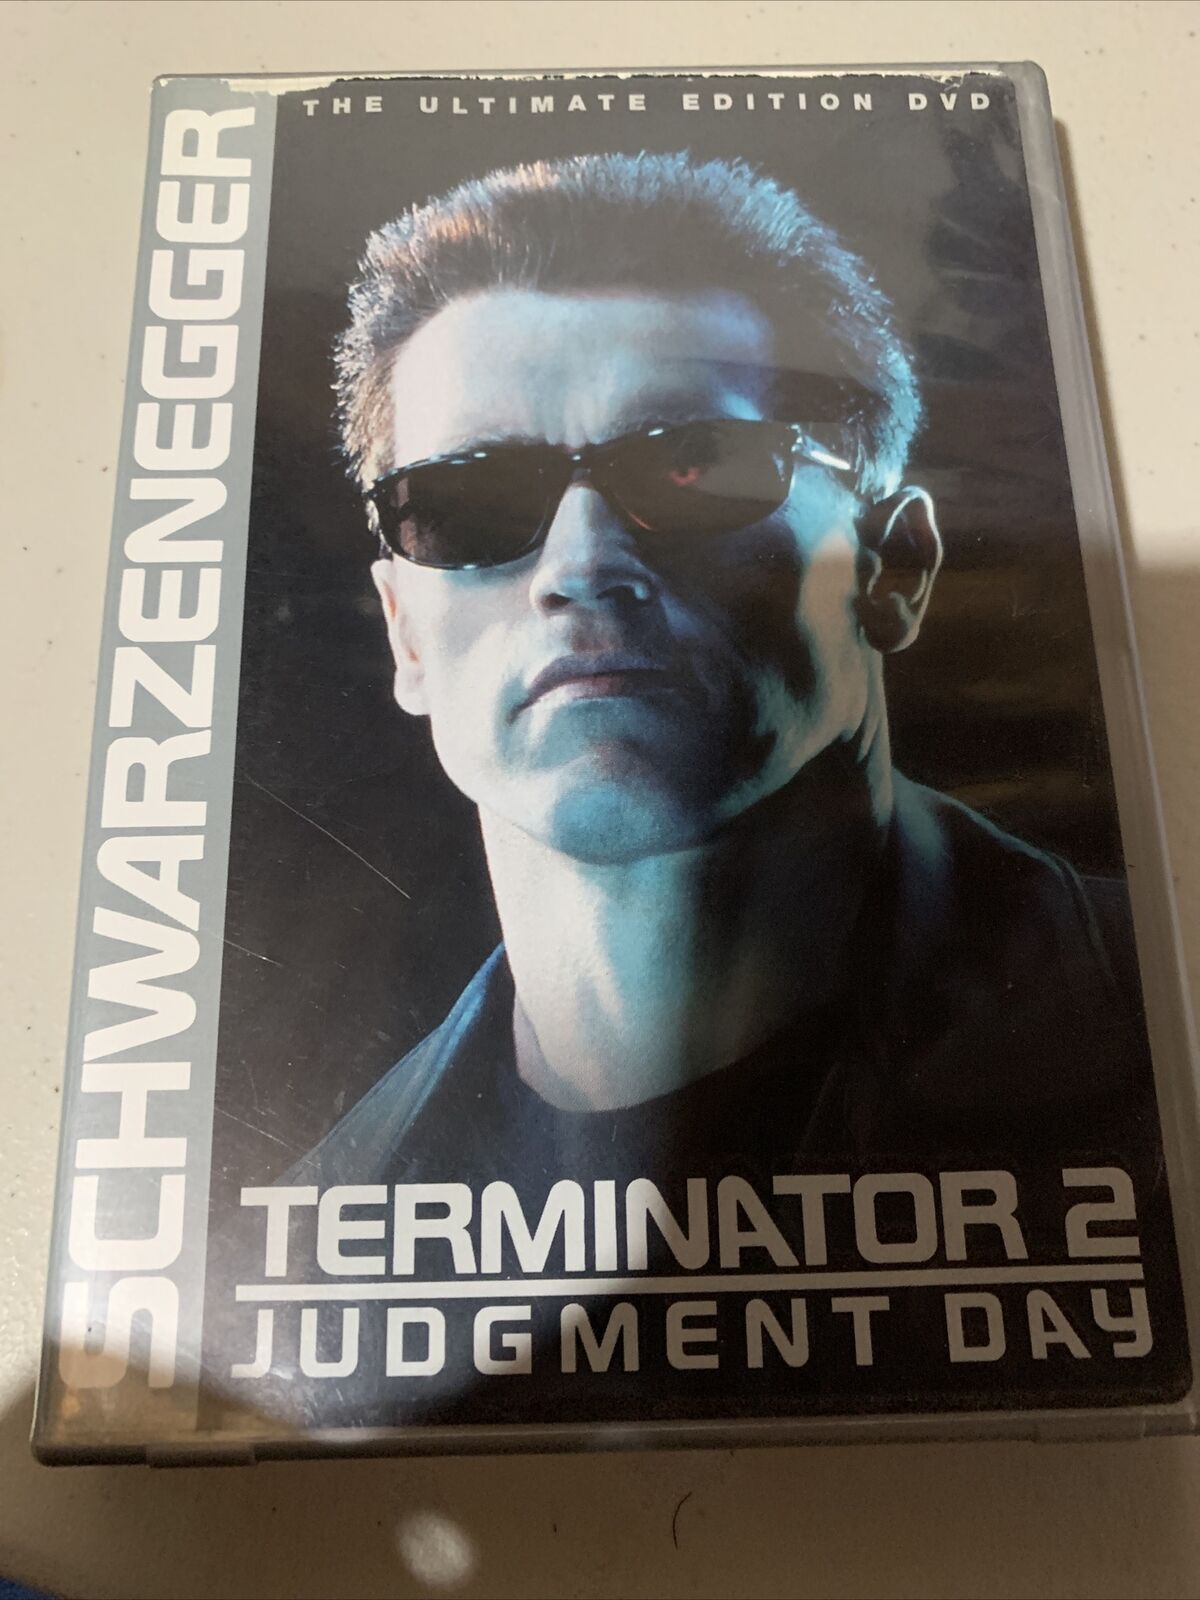 T2 - The Extreme DVD Edition (DVD, 2001, 2-Disc Set)